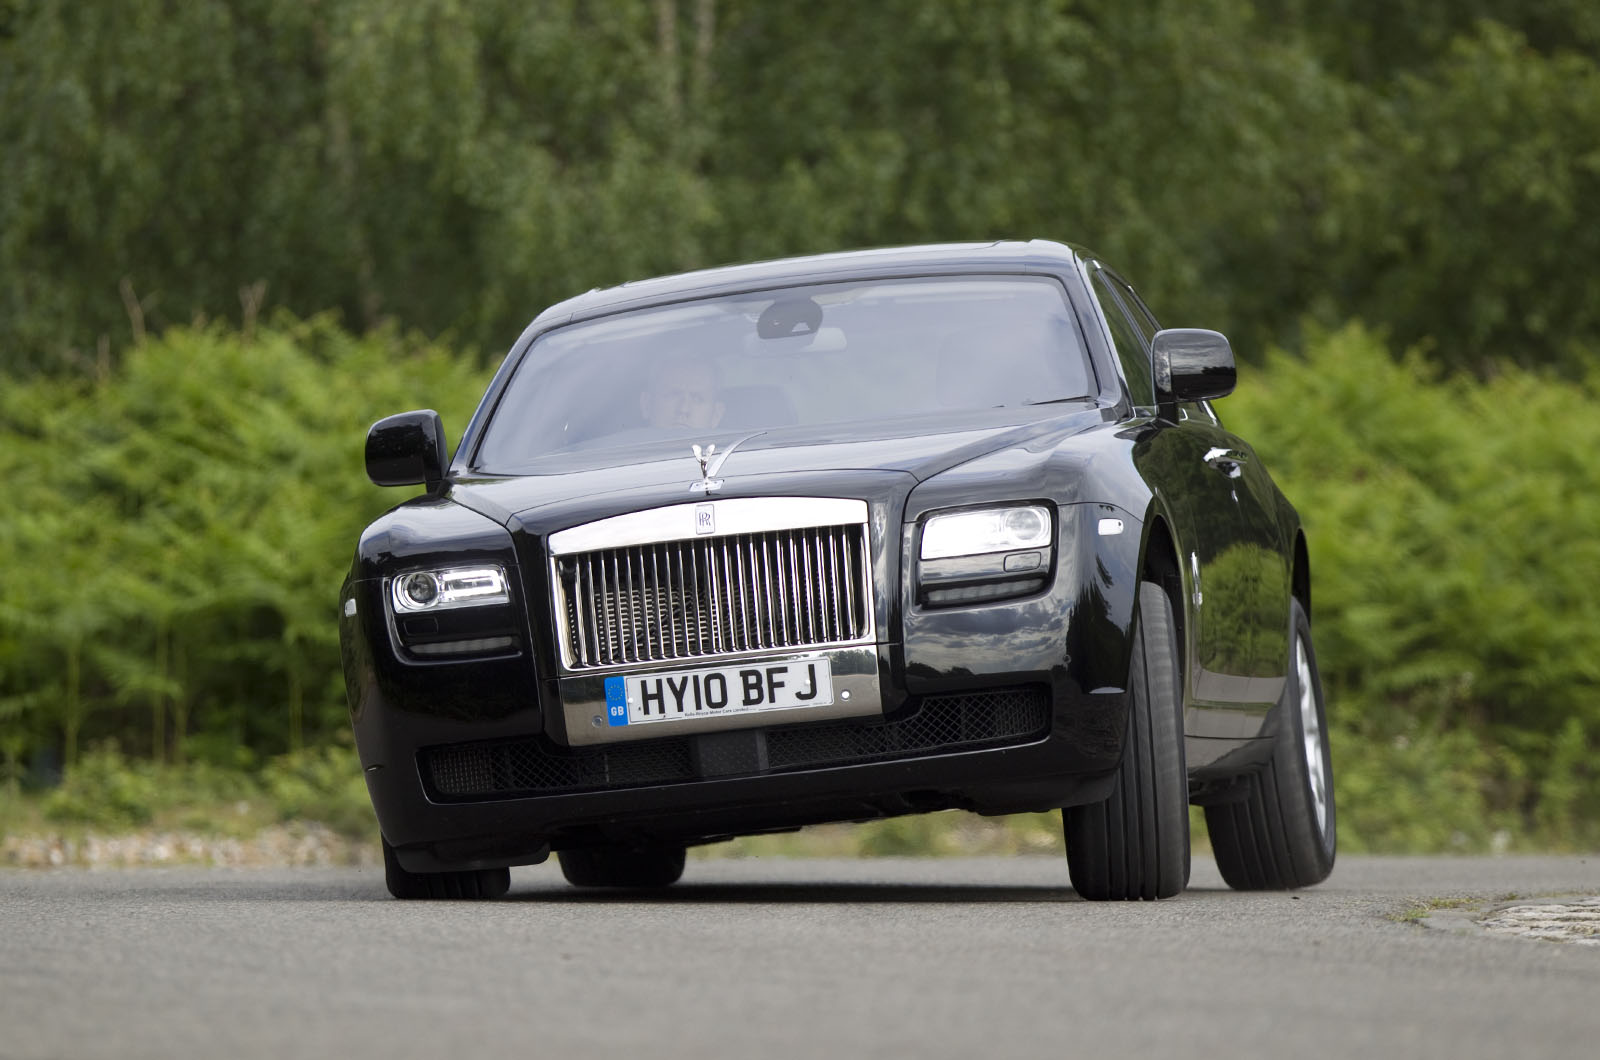 The new Ghost is the most technologically advanced RollsRoyce to date   Video  CNET